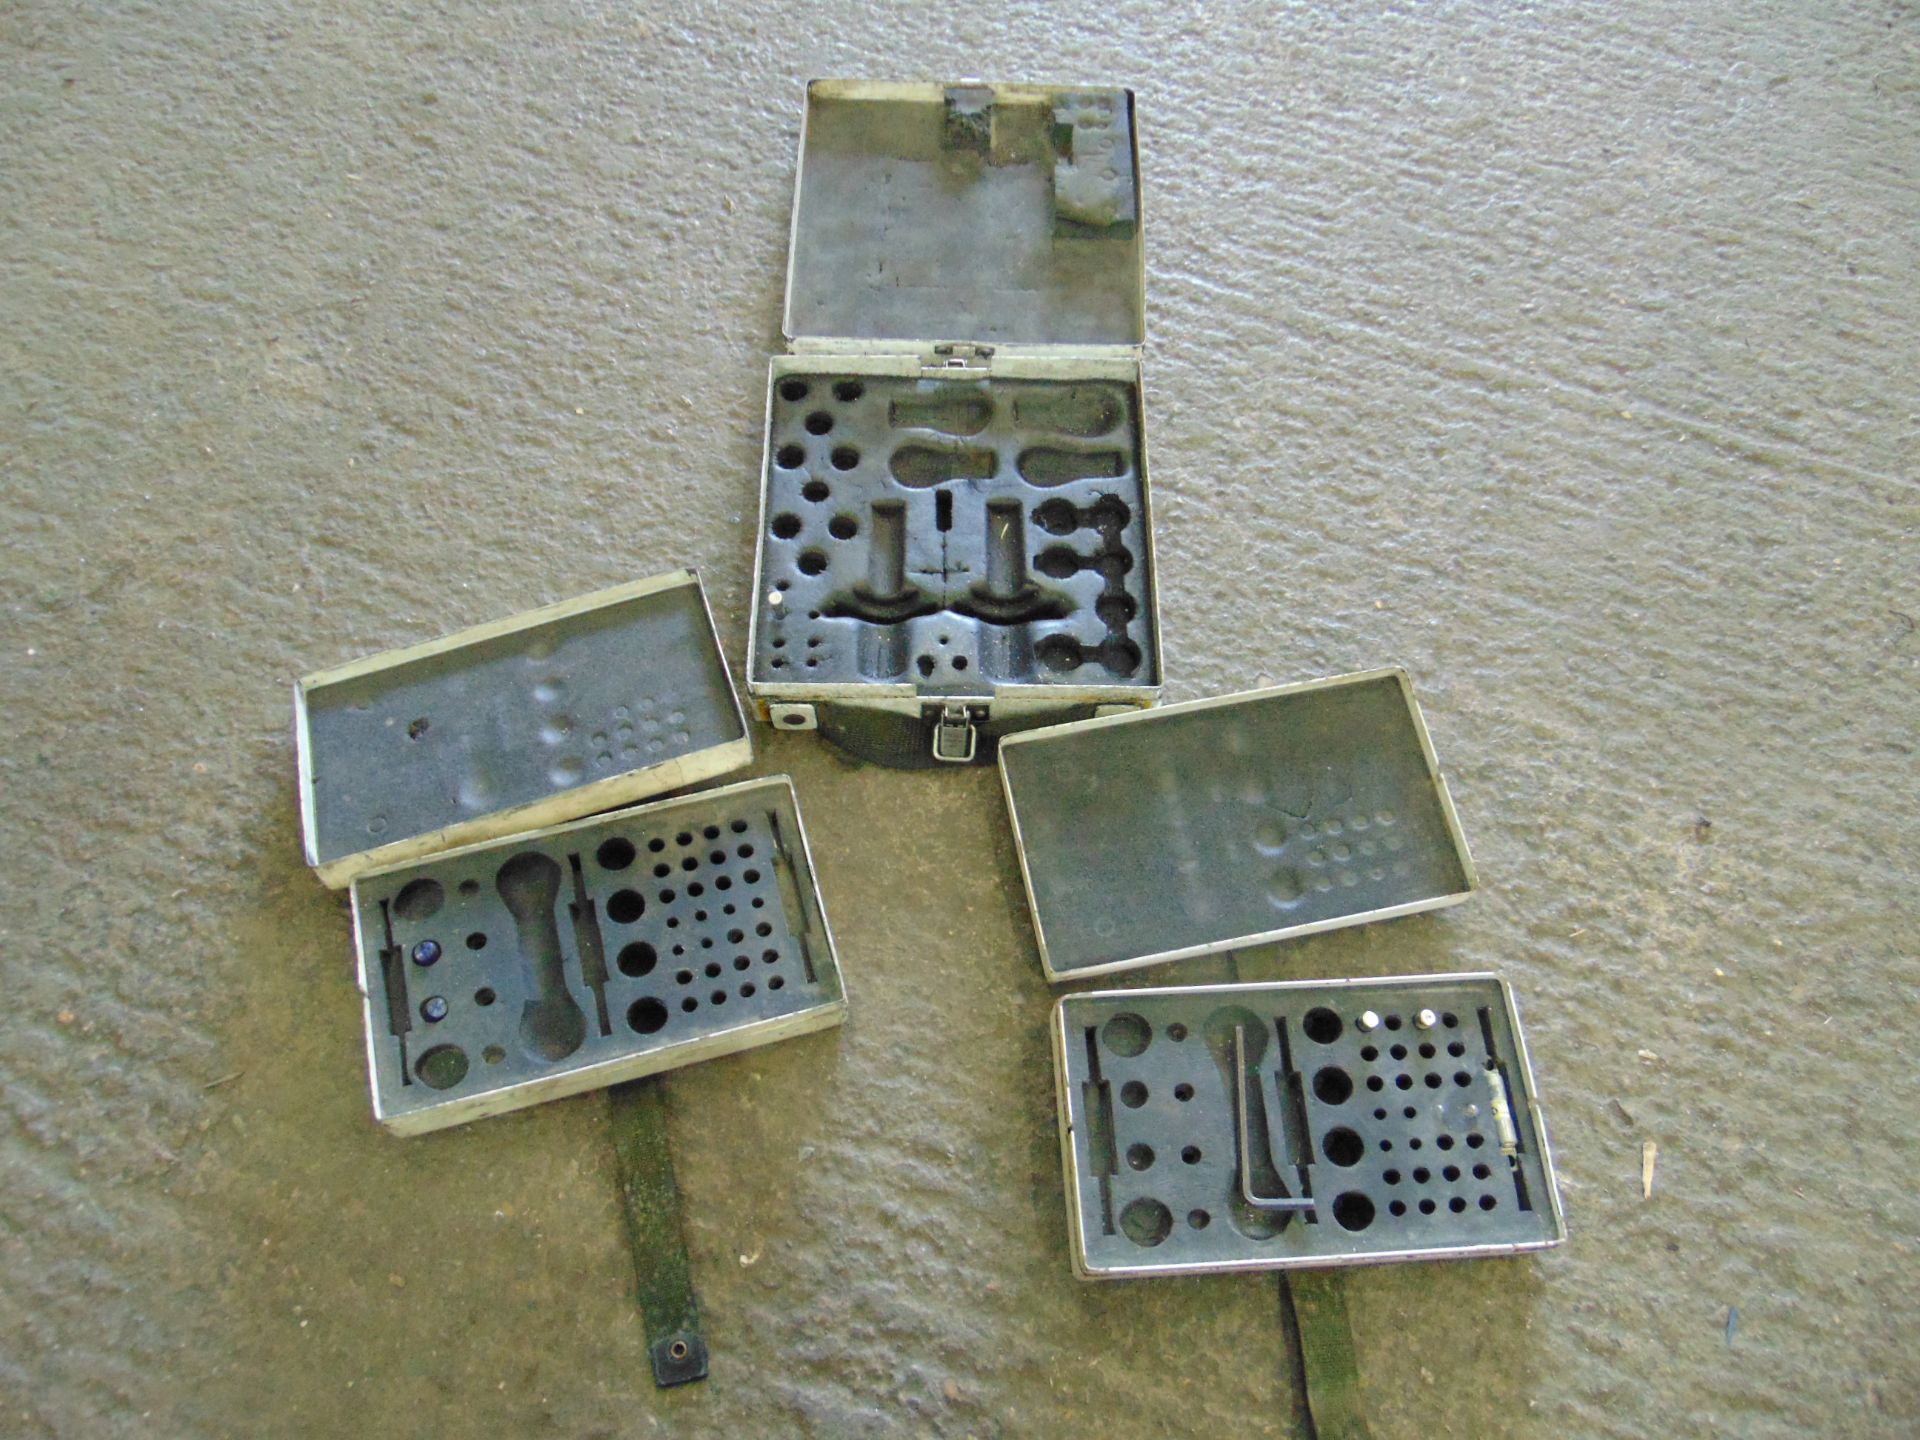 AFV SPARE FUSE/LIGHT HOLDER CASES 1 X LARGE 2 X SMALL - Image 3 of 3